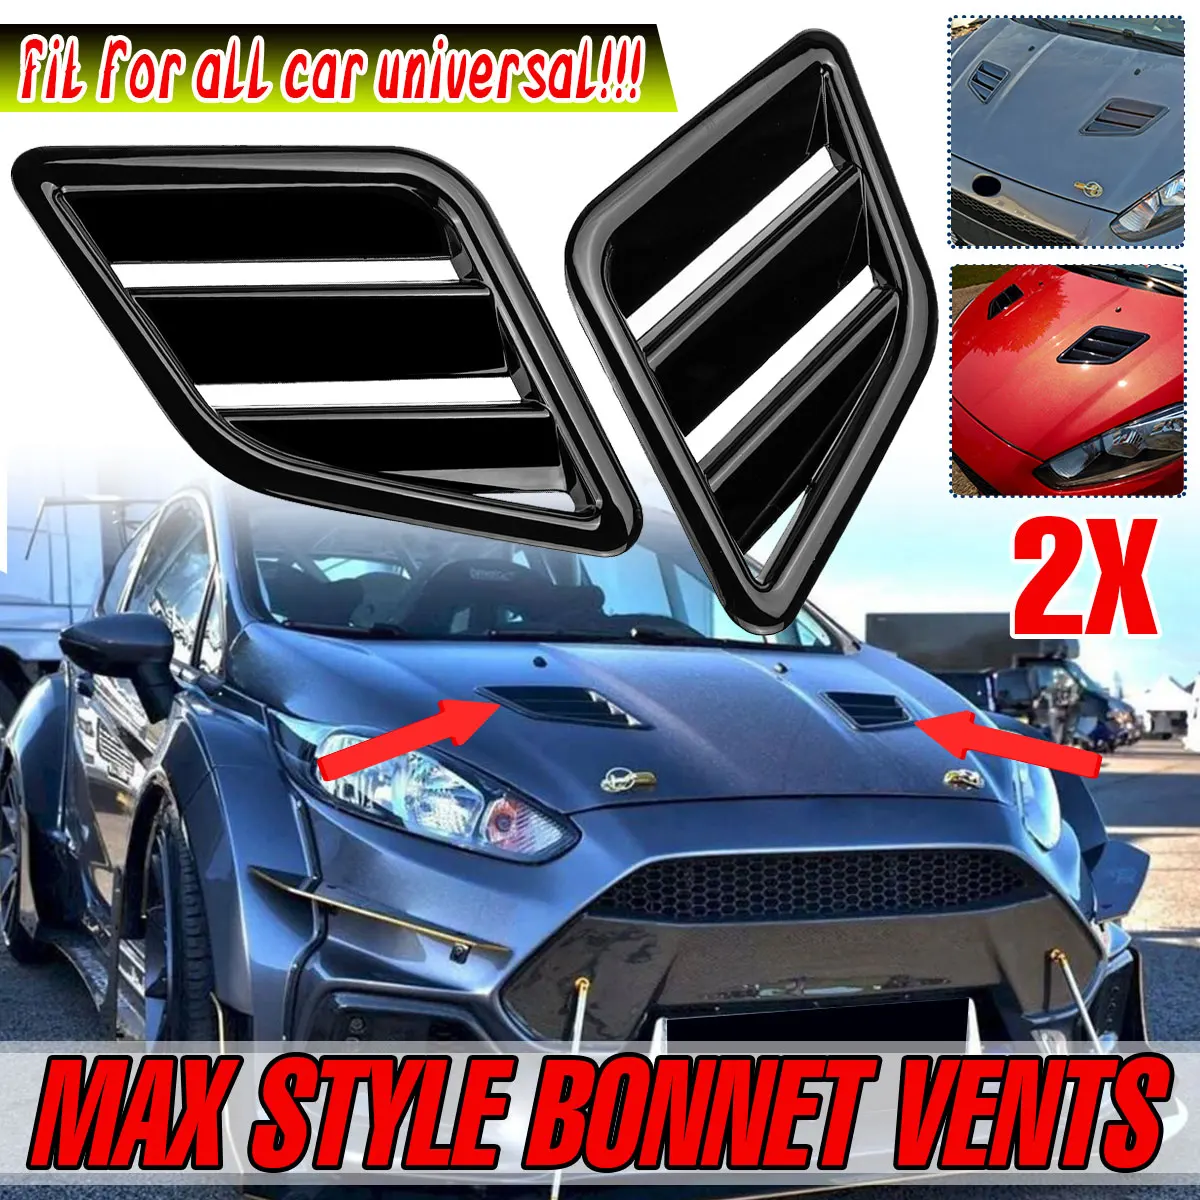 

RM-CAR Glossy Black Pair Universal Bonnet Air Vents Engine Hood For Focus Fiesta RS ST For Vauxhall Max Style Car Front Vent